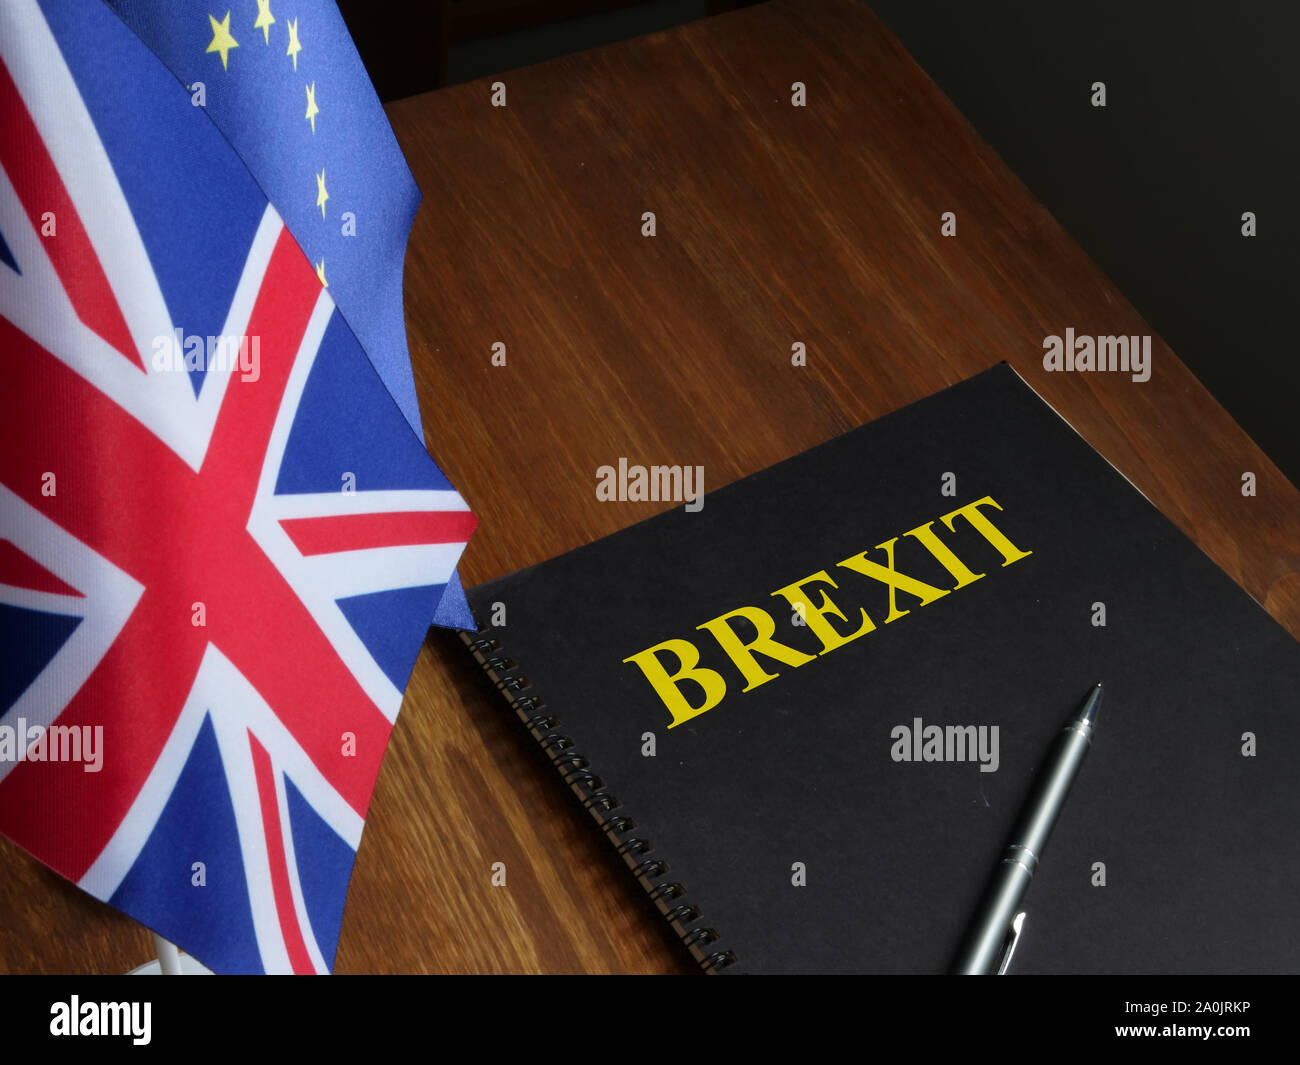 Brexit agreement and Europe Union flag with UK flag. Stock Photo